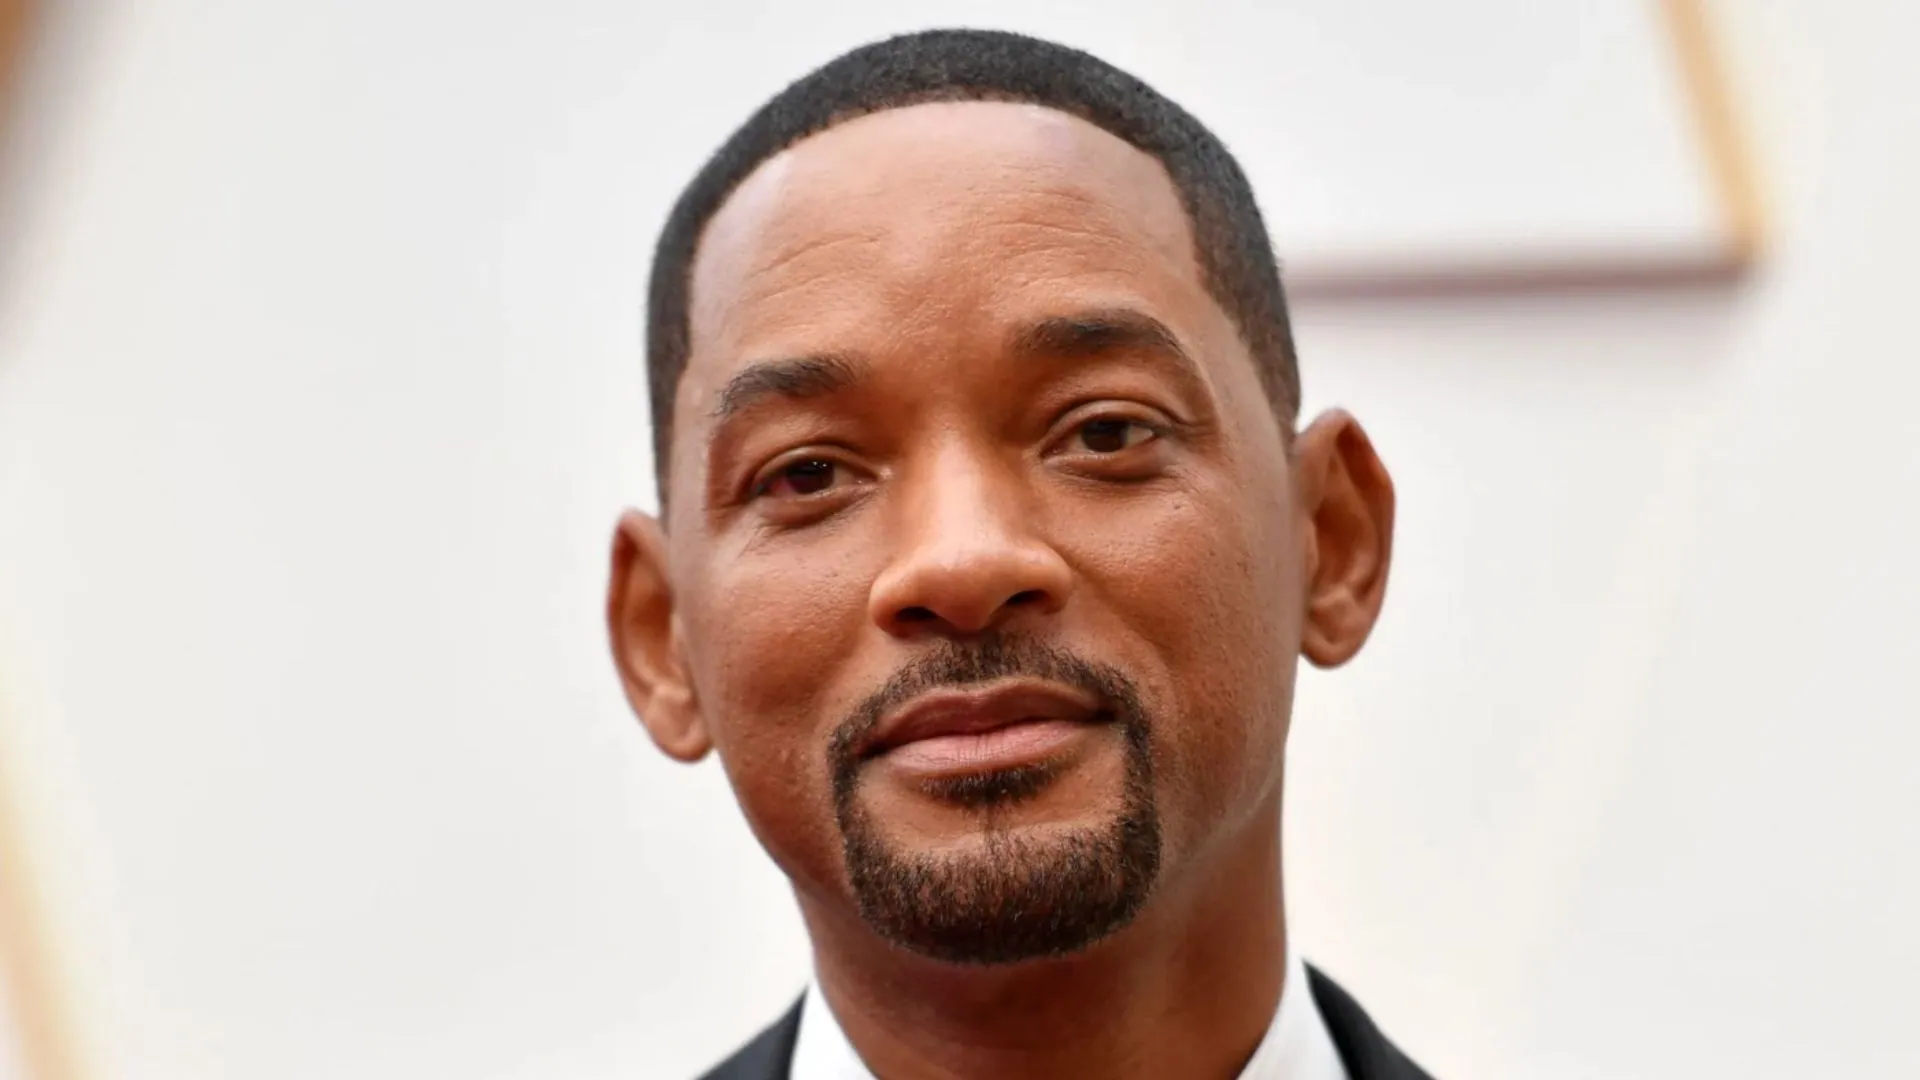 Will Smith's Latest Film 'Emancipation' Gets First Public Screening